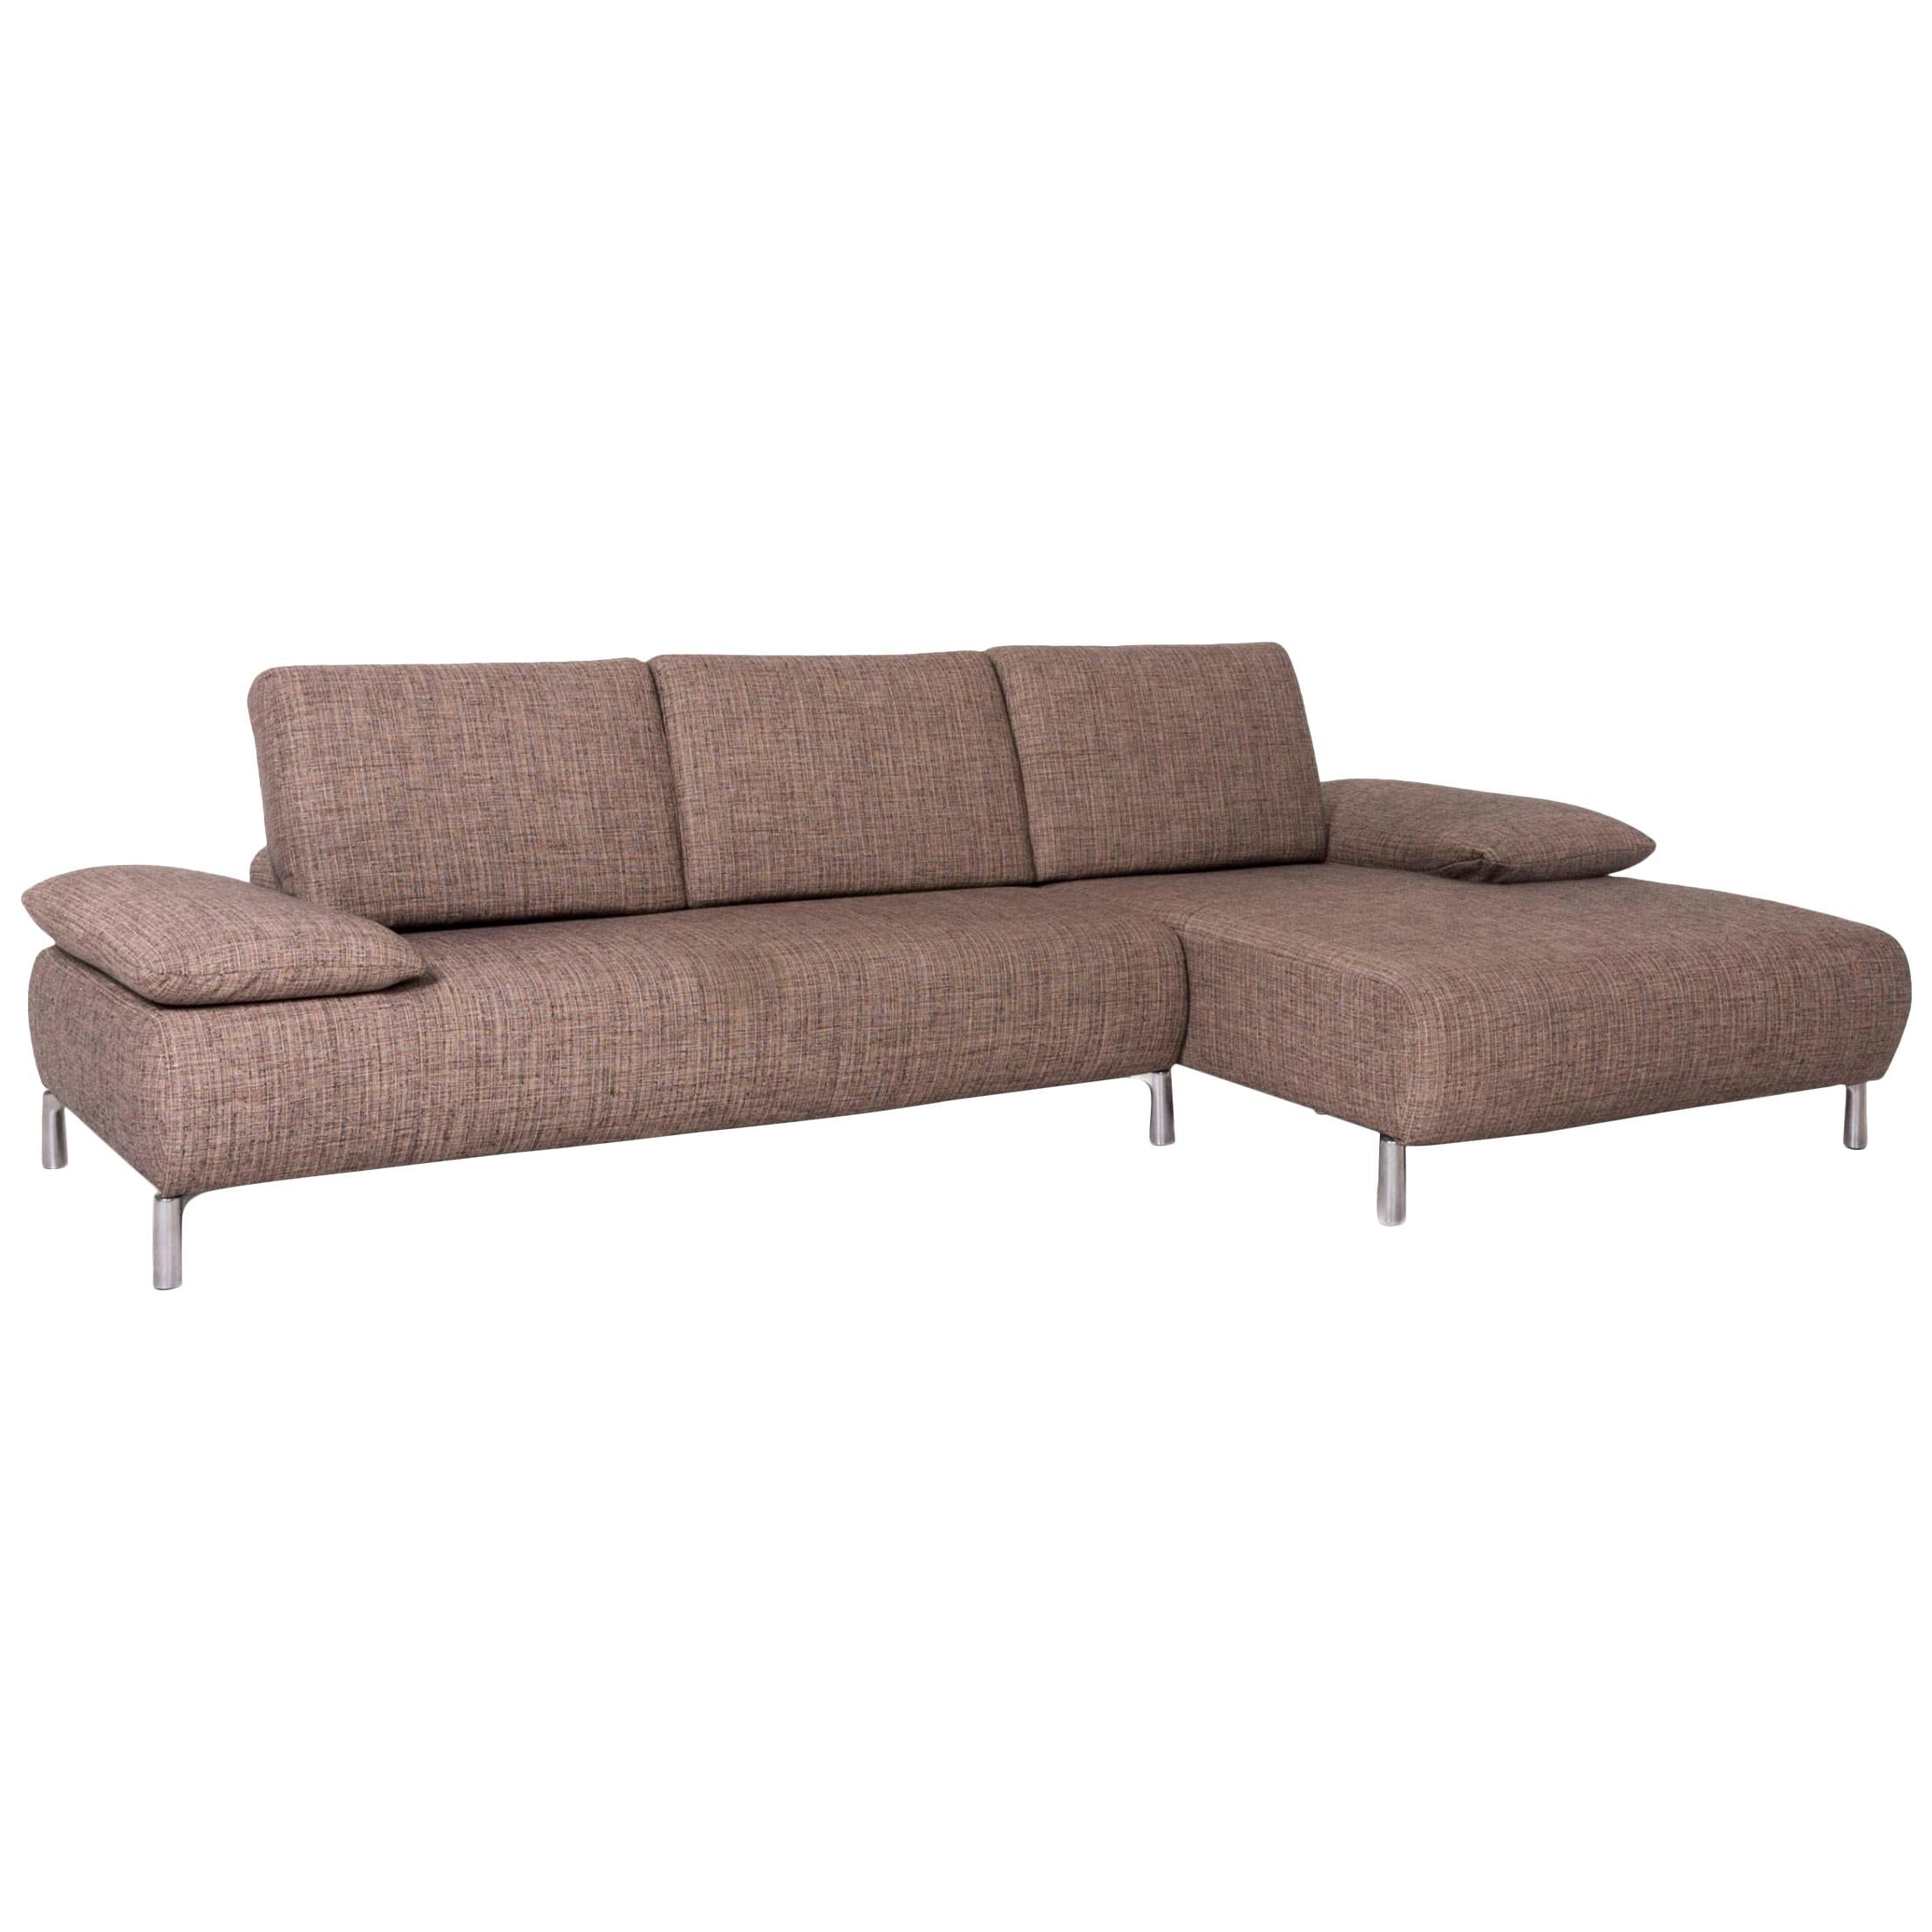 Koinor Fabric Corner Sofa Brown Sofa Function Couch For Sale